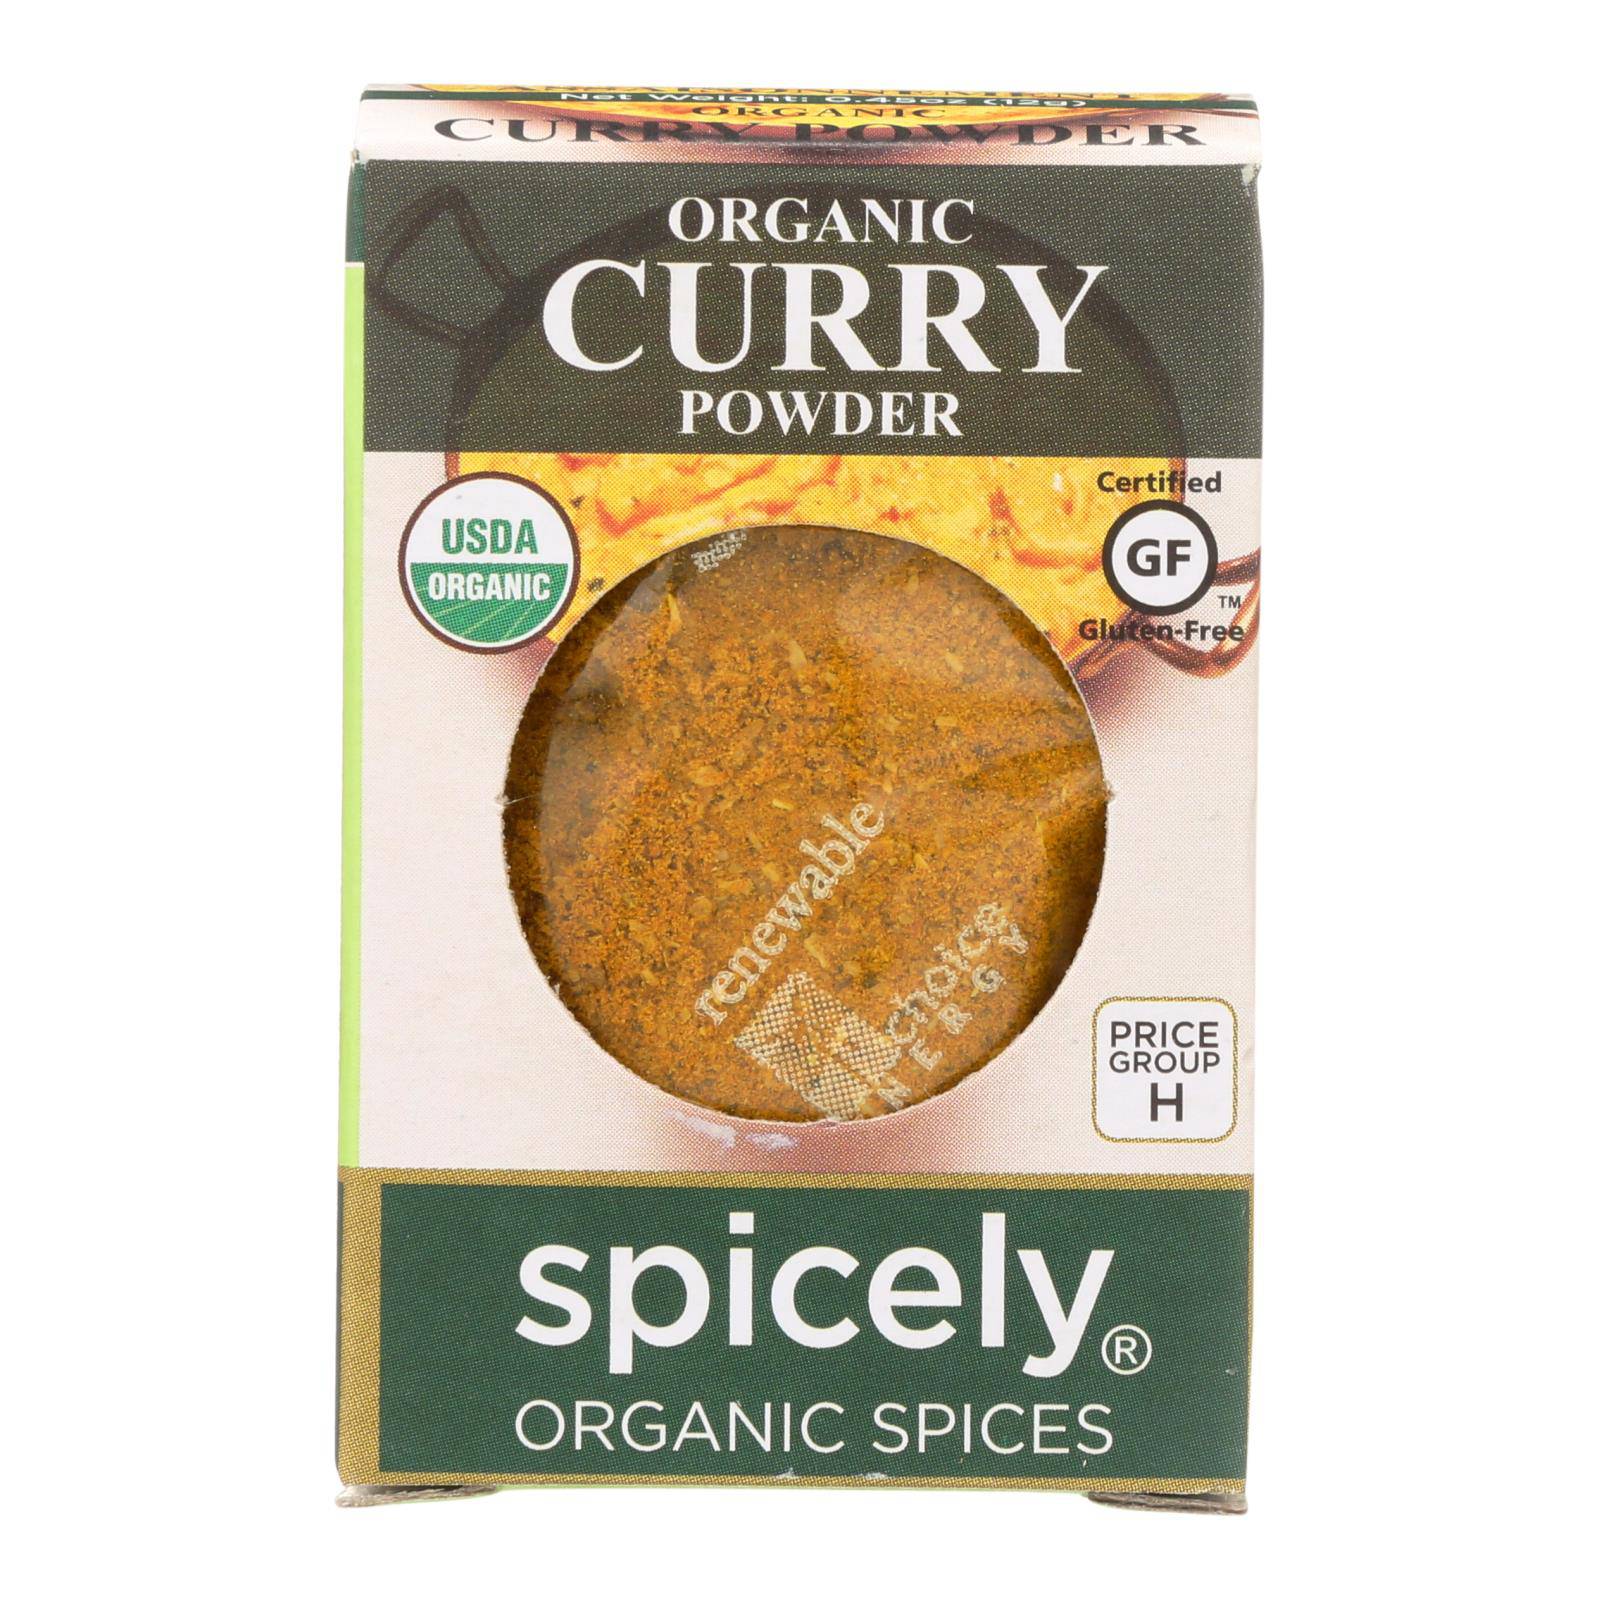 Buy Spicely Organics - Organic Curry Powder - Case Of 6 - 0.45 Oz.  at OnlyNaturals.us